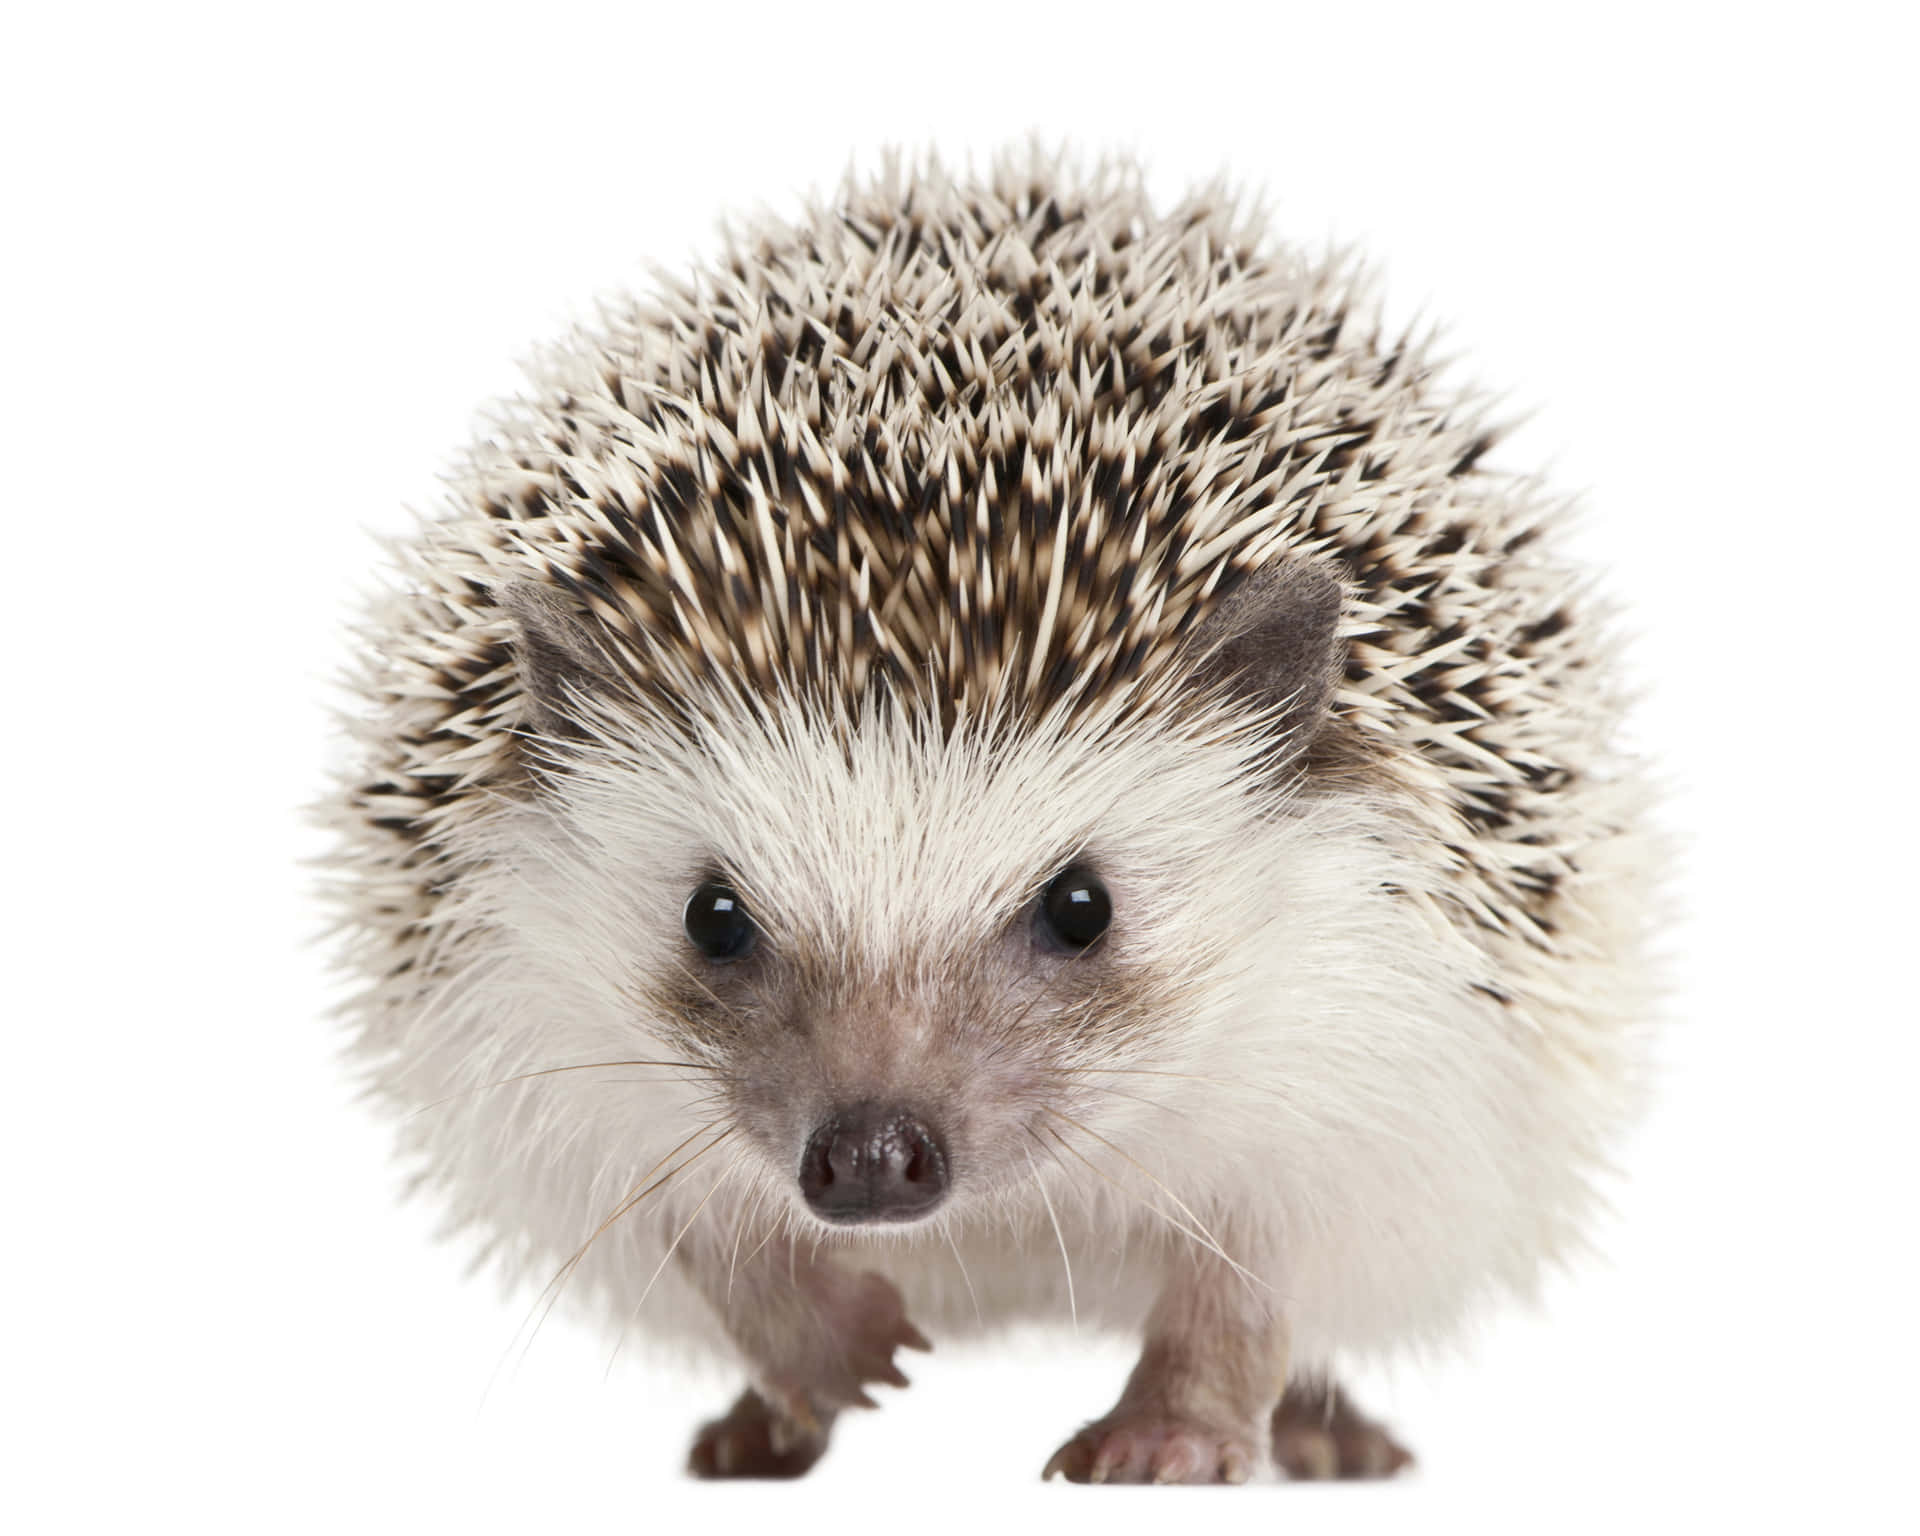 A Hedgehog Is Walking On A White Background Wallpaper